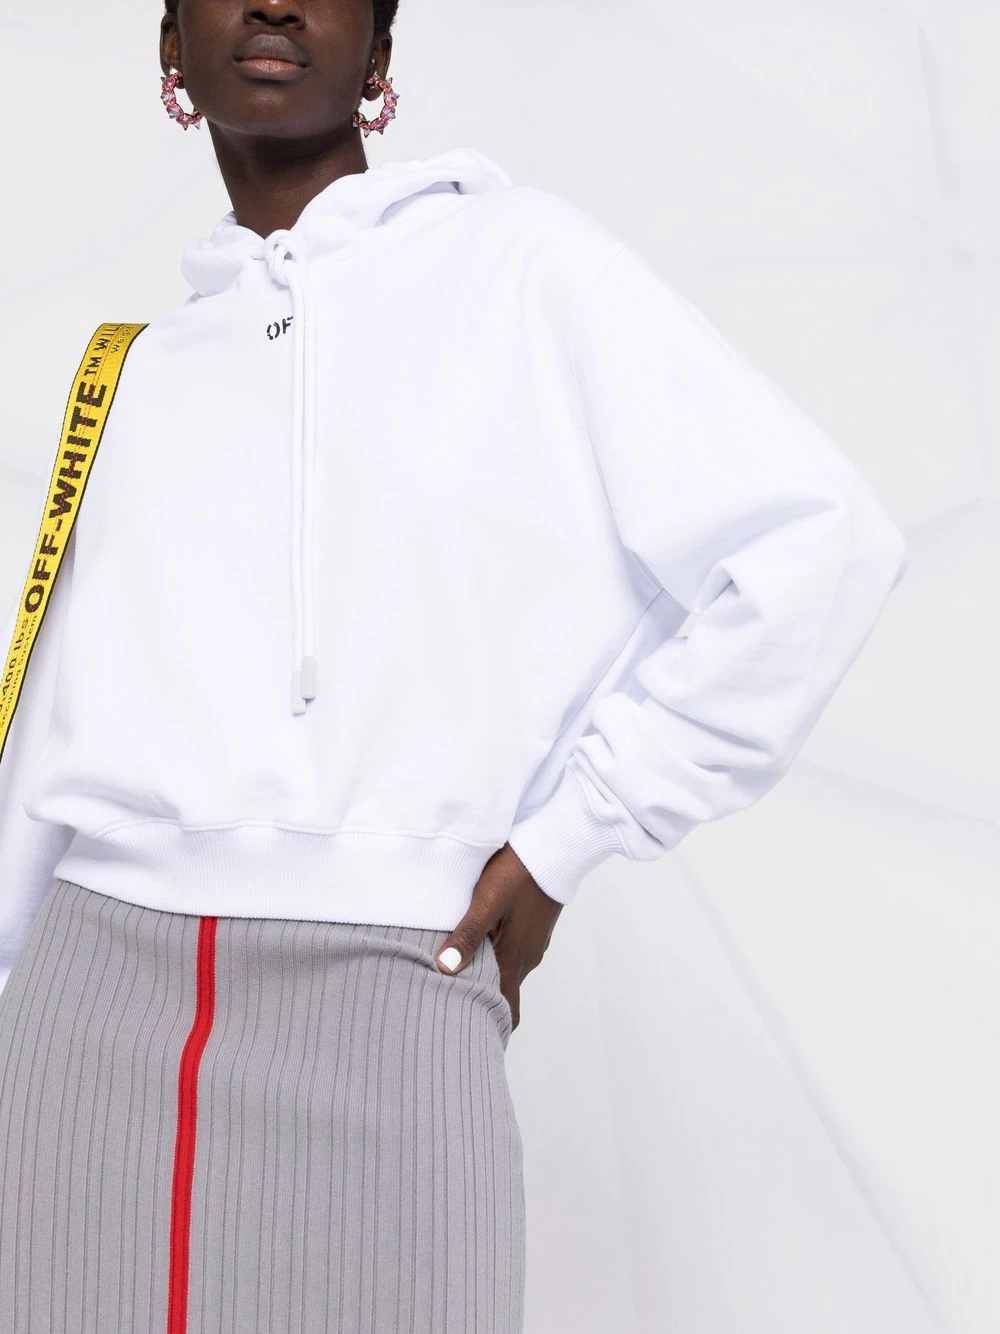 off-white Cropped hoodie available on theapartmentcosenza.com